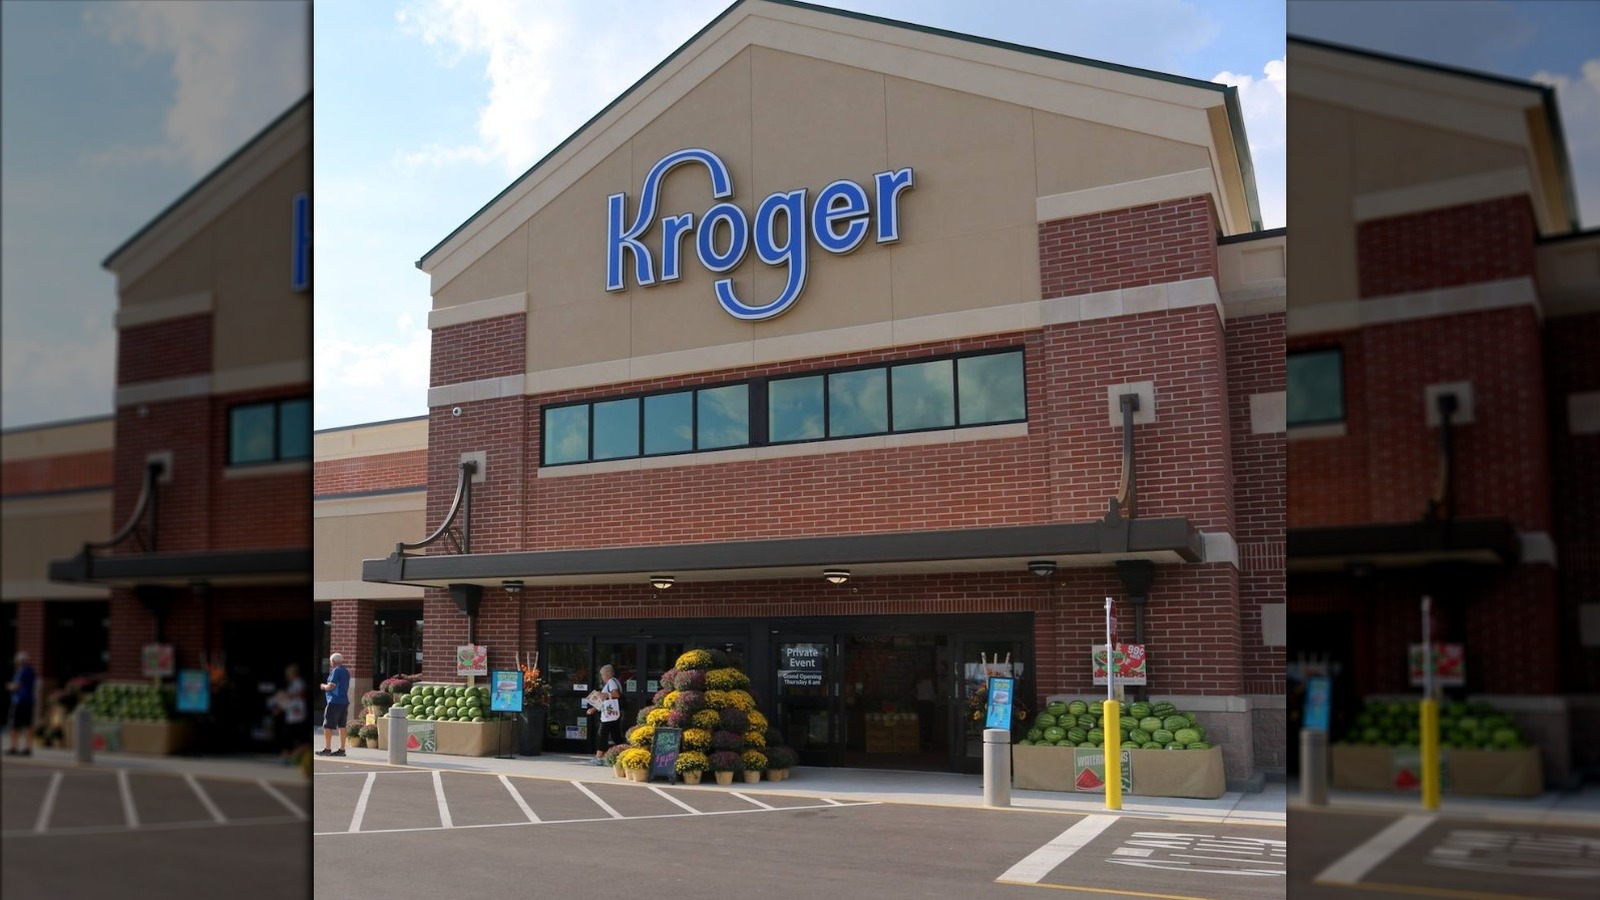 Is Kroger Open On Christmas Day 2020?